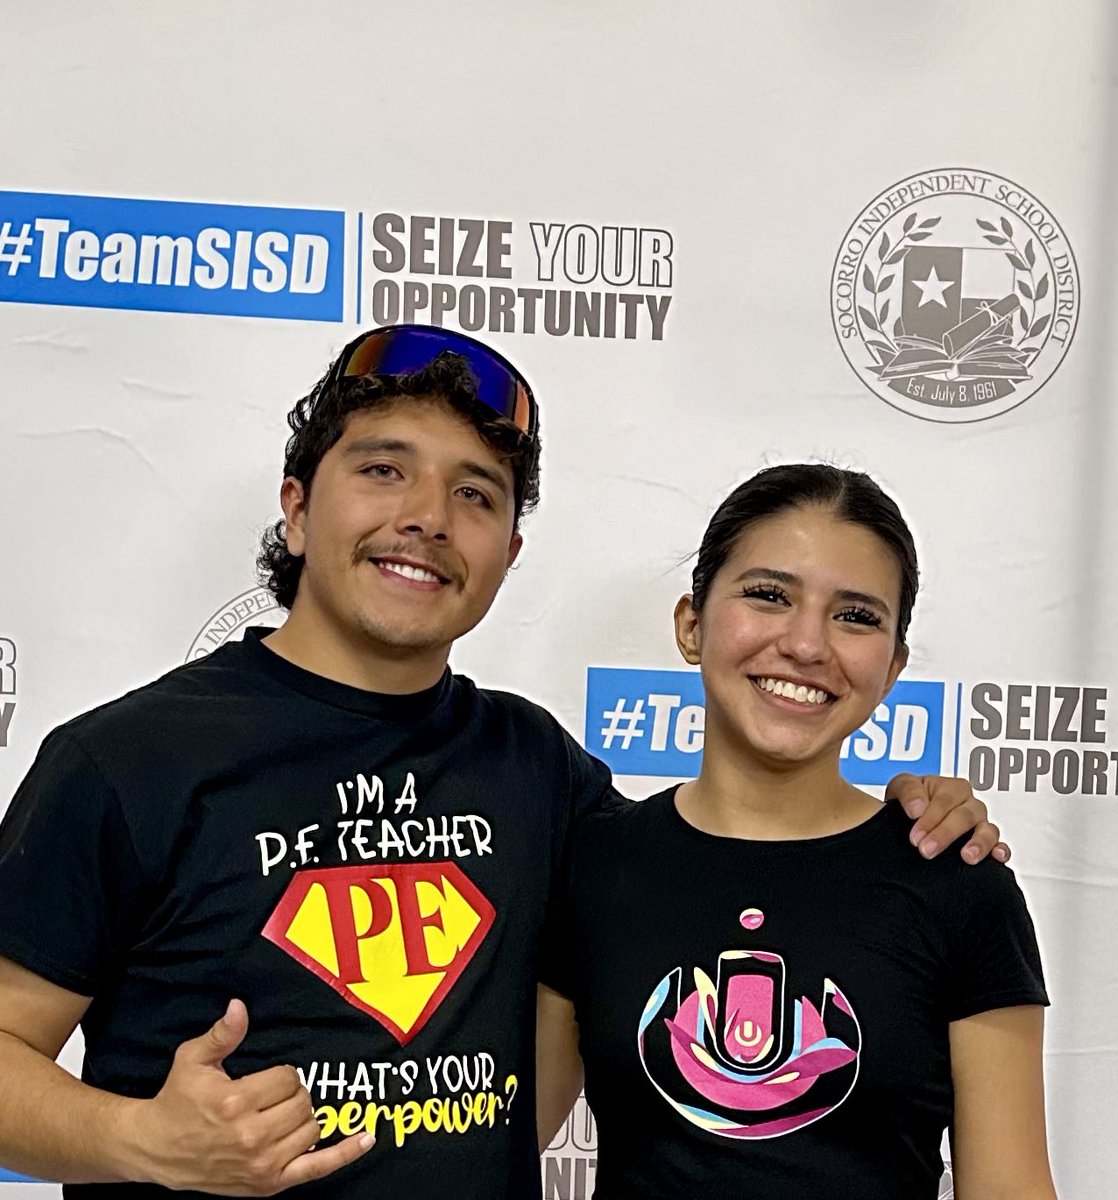 Always put your mind and body first! Swolemate event was so much fun🚴🏽‍♀️💪🏽 We’ll definitely be sore tomorrow 😮‍💨 #TeamSISD #healthybodystrongmind #teacherswholift #teacherswhorun #buffvengers